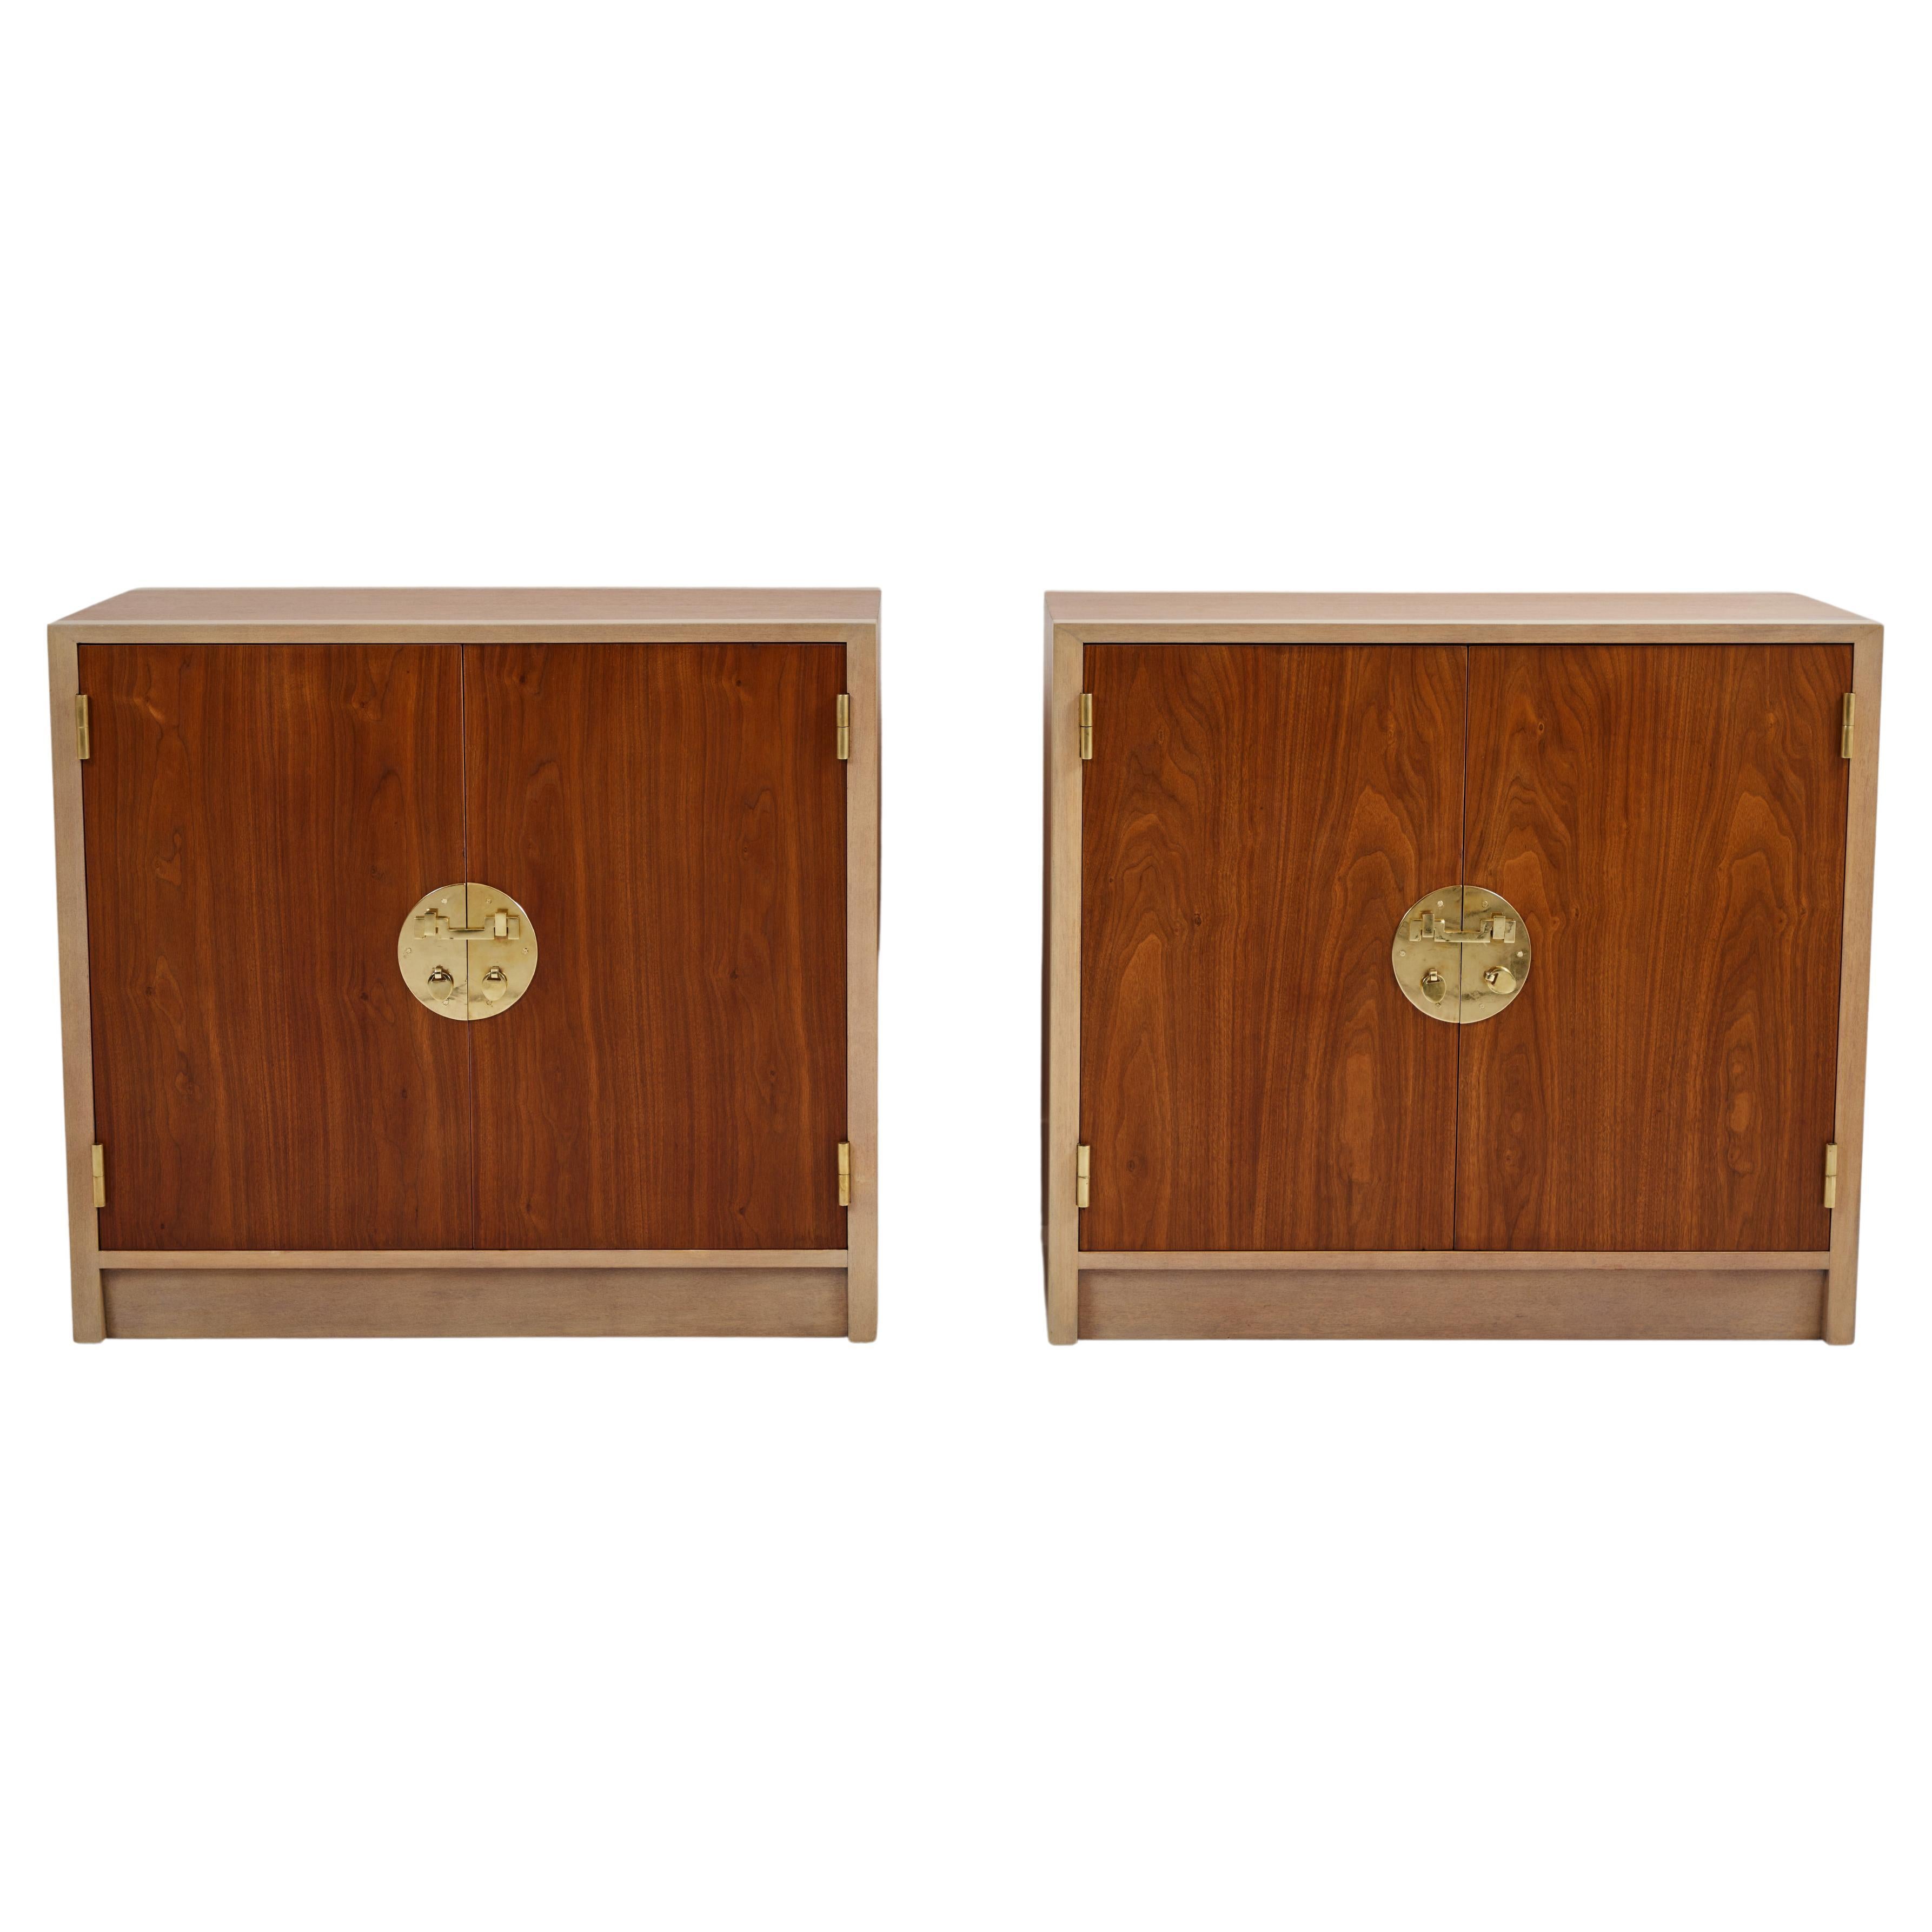 Pair of Cabinets Designed by Edward Wormley for Dunbar